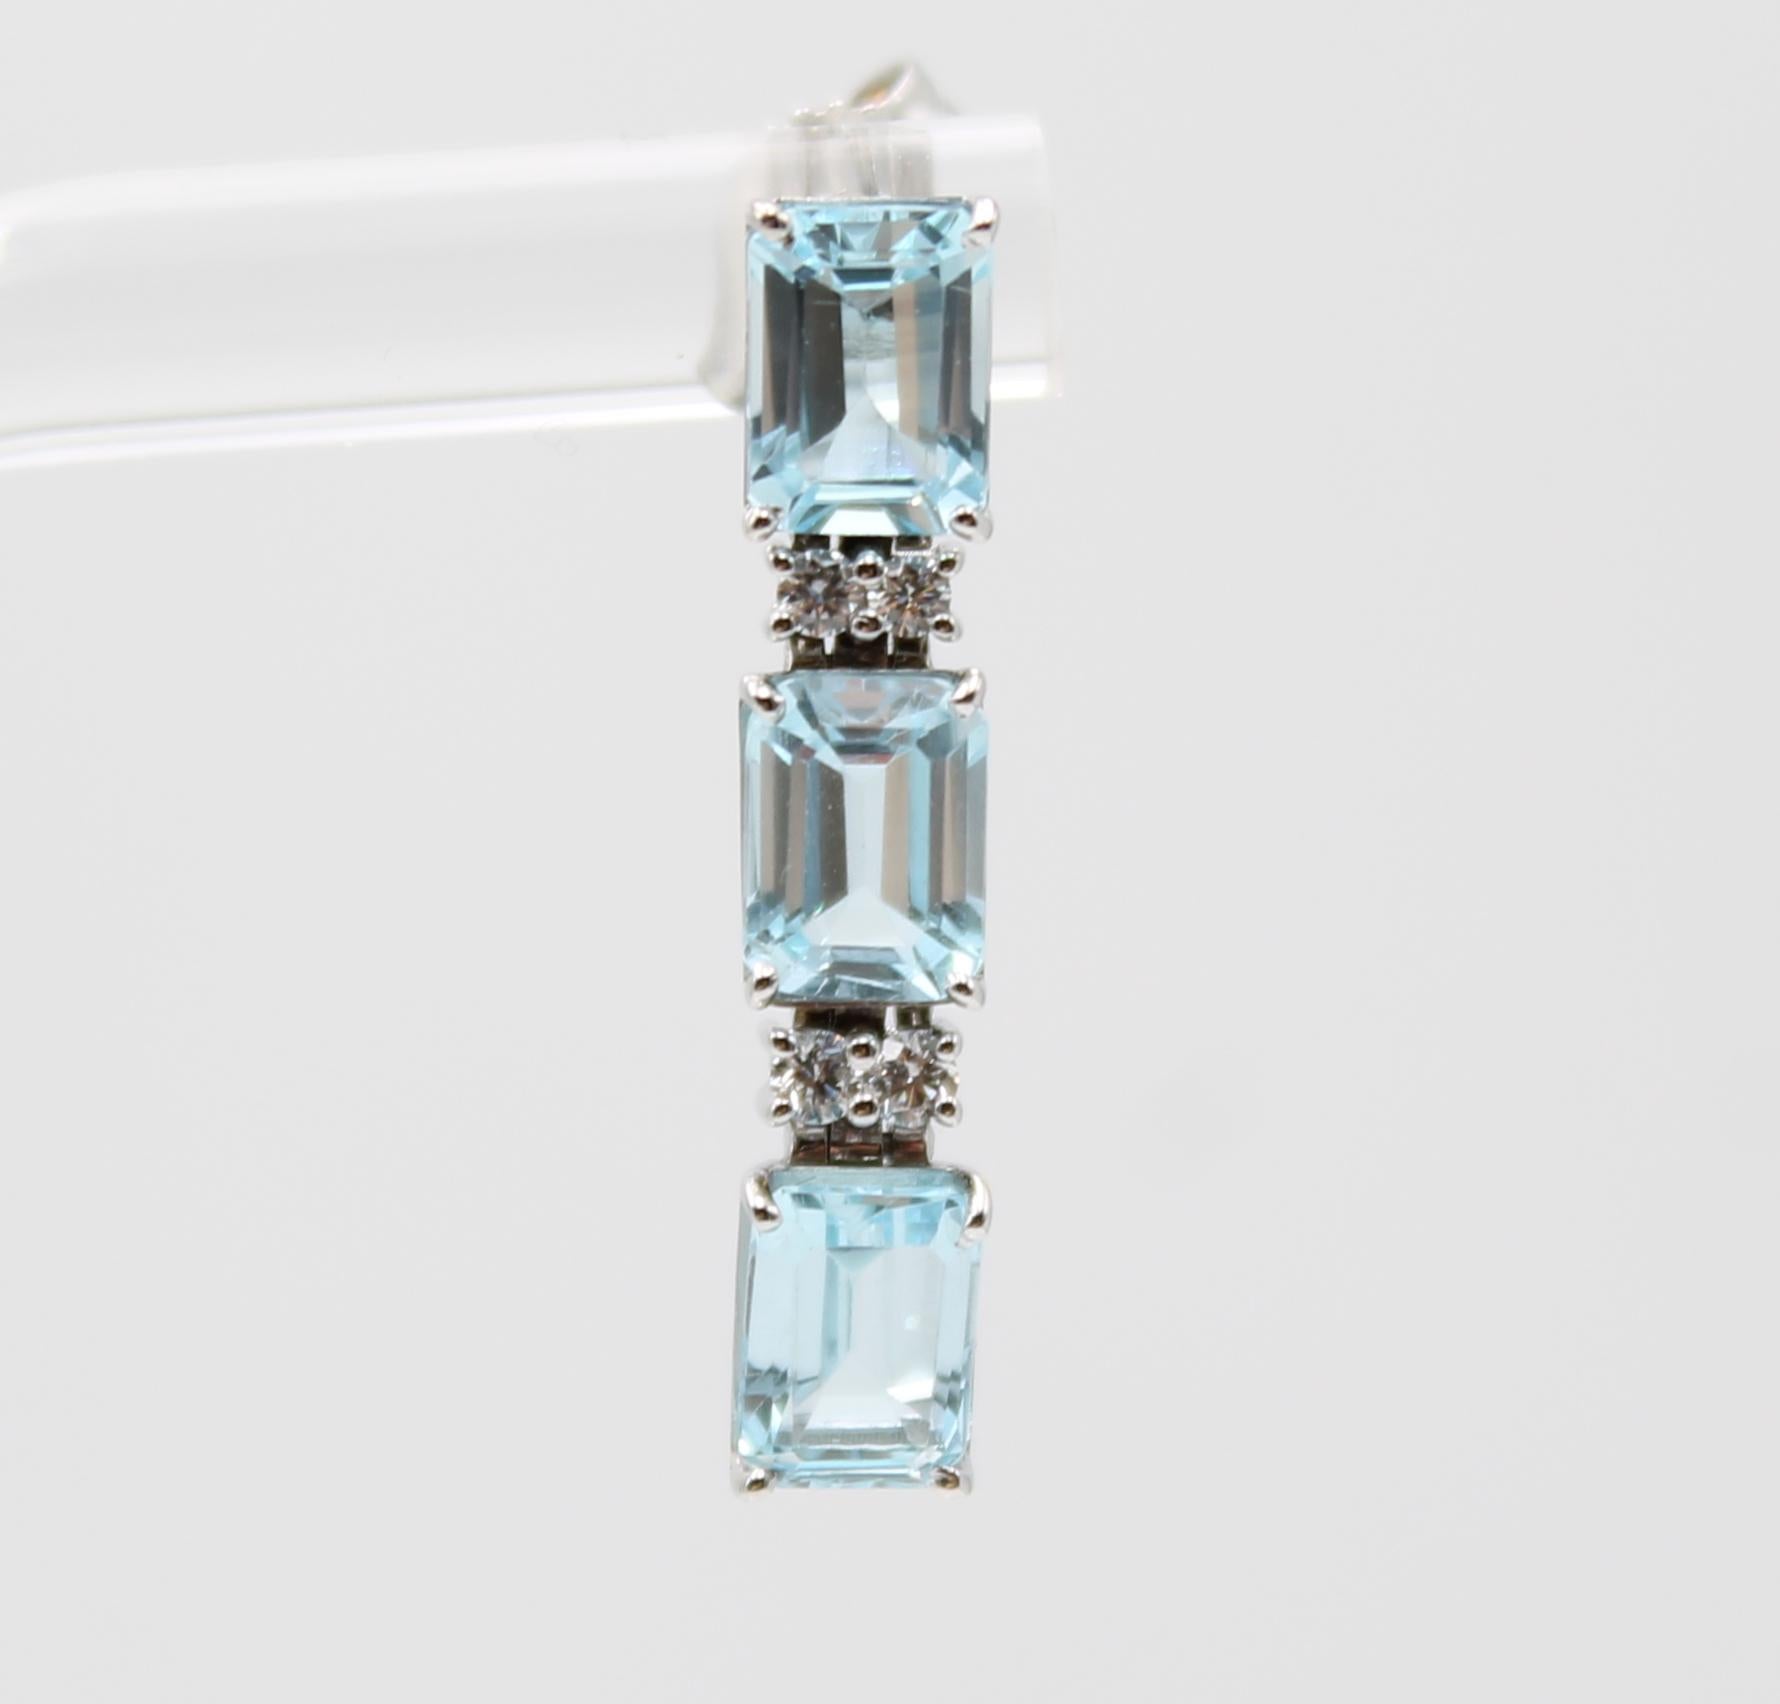 18 kt white gold earrings made up of three rectangular aquamarine gems interspersed with diamonds.
The earrings are handmade by Italian artisans, and contain:
- 6 aquamarines, emerald cut, deep blue color, size 6x4 mm,, total carats 7.45
- 8